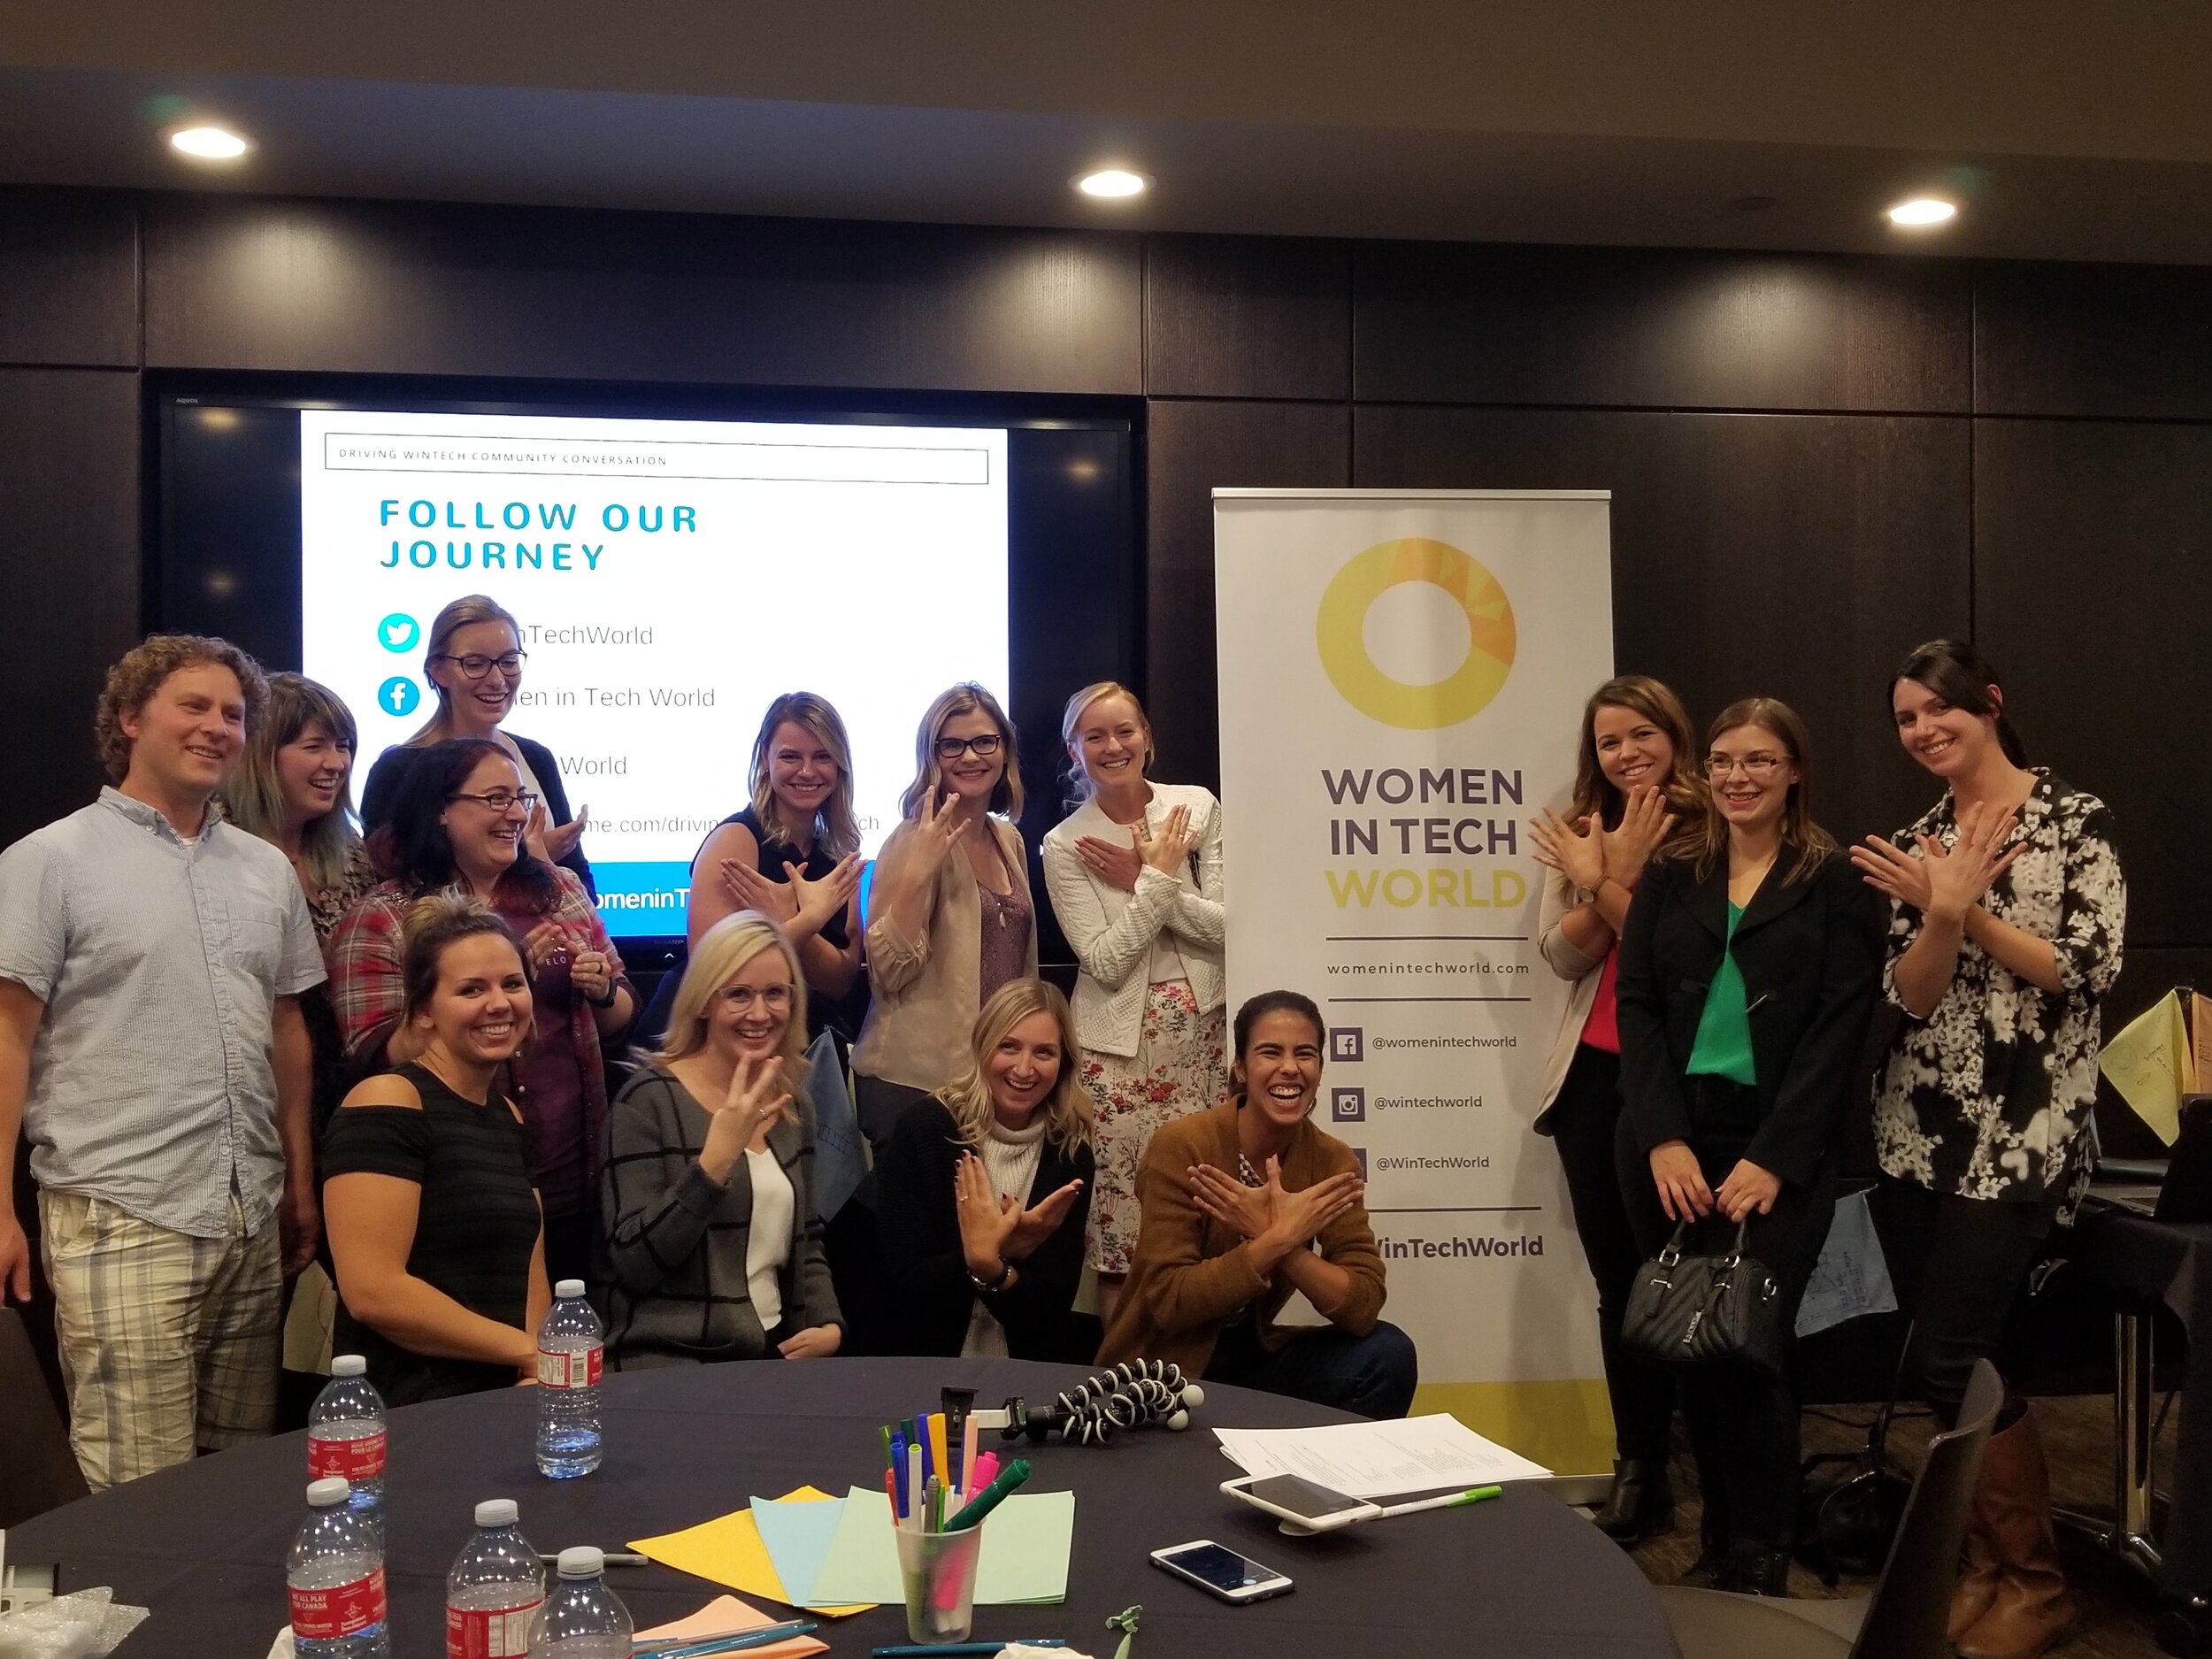  Image is of the Community Conversation in Saskatoon. There is a group of people gathered in front of the WiTWorld sign in a conference room, posing for a picture.  